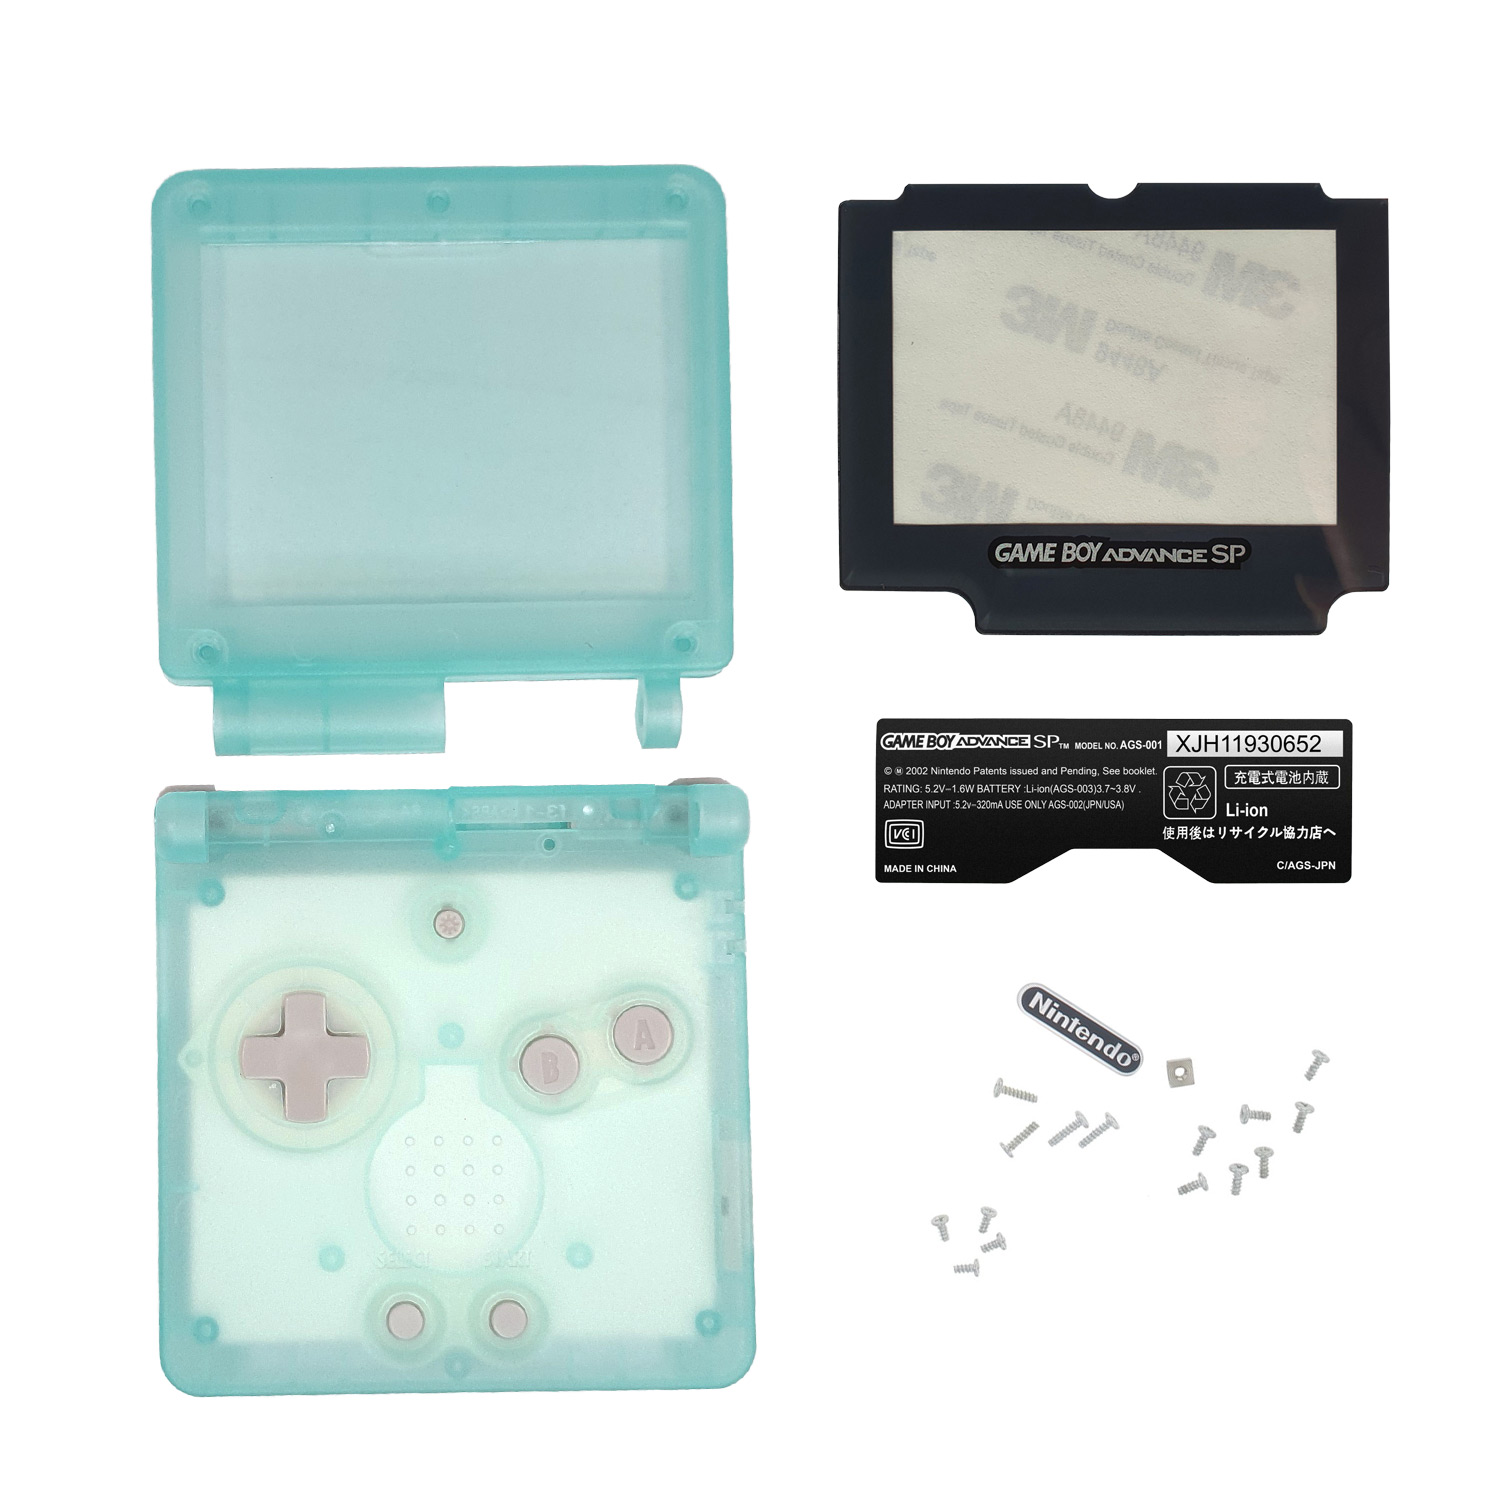 Game Boy Advance SP Shell (Glow in the Dark)